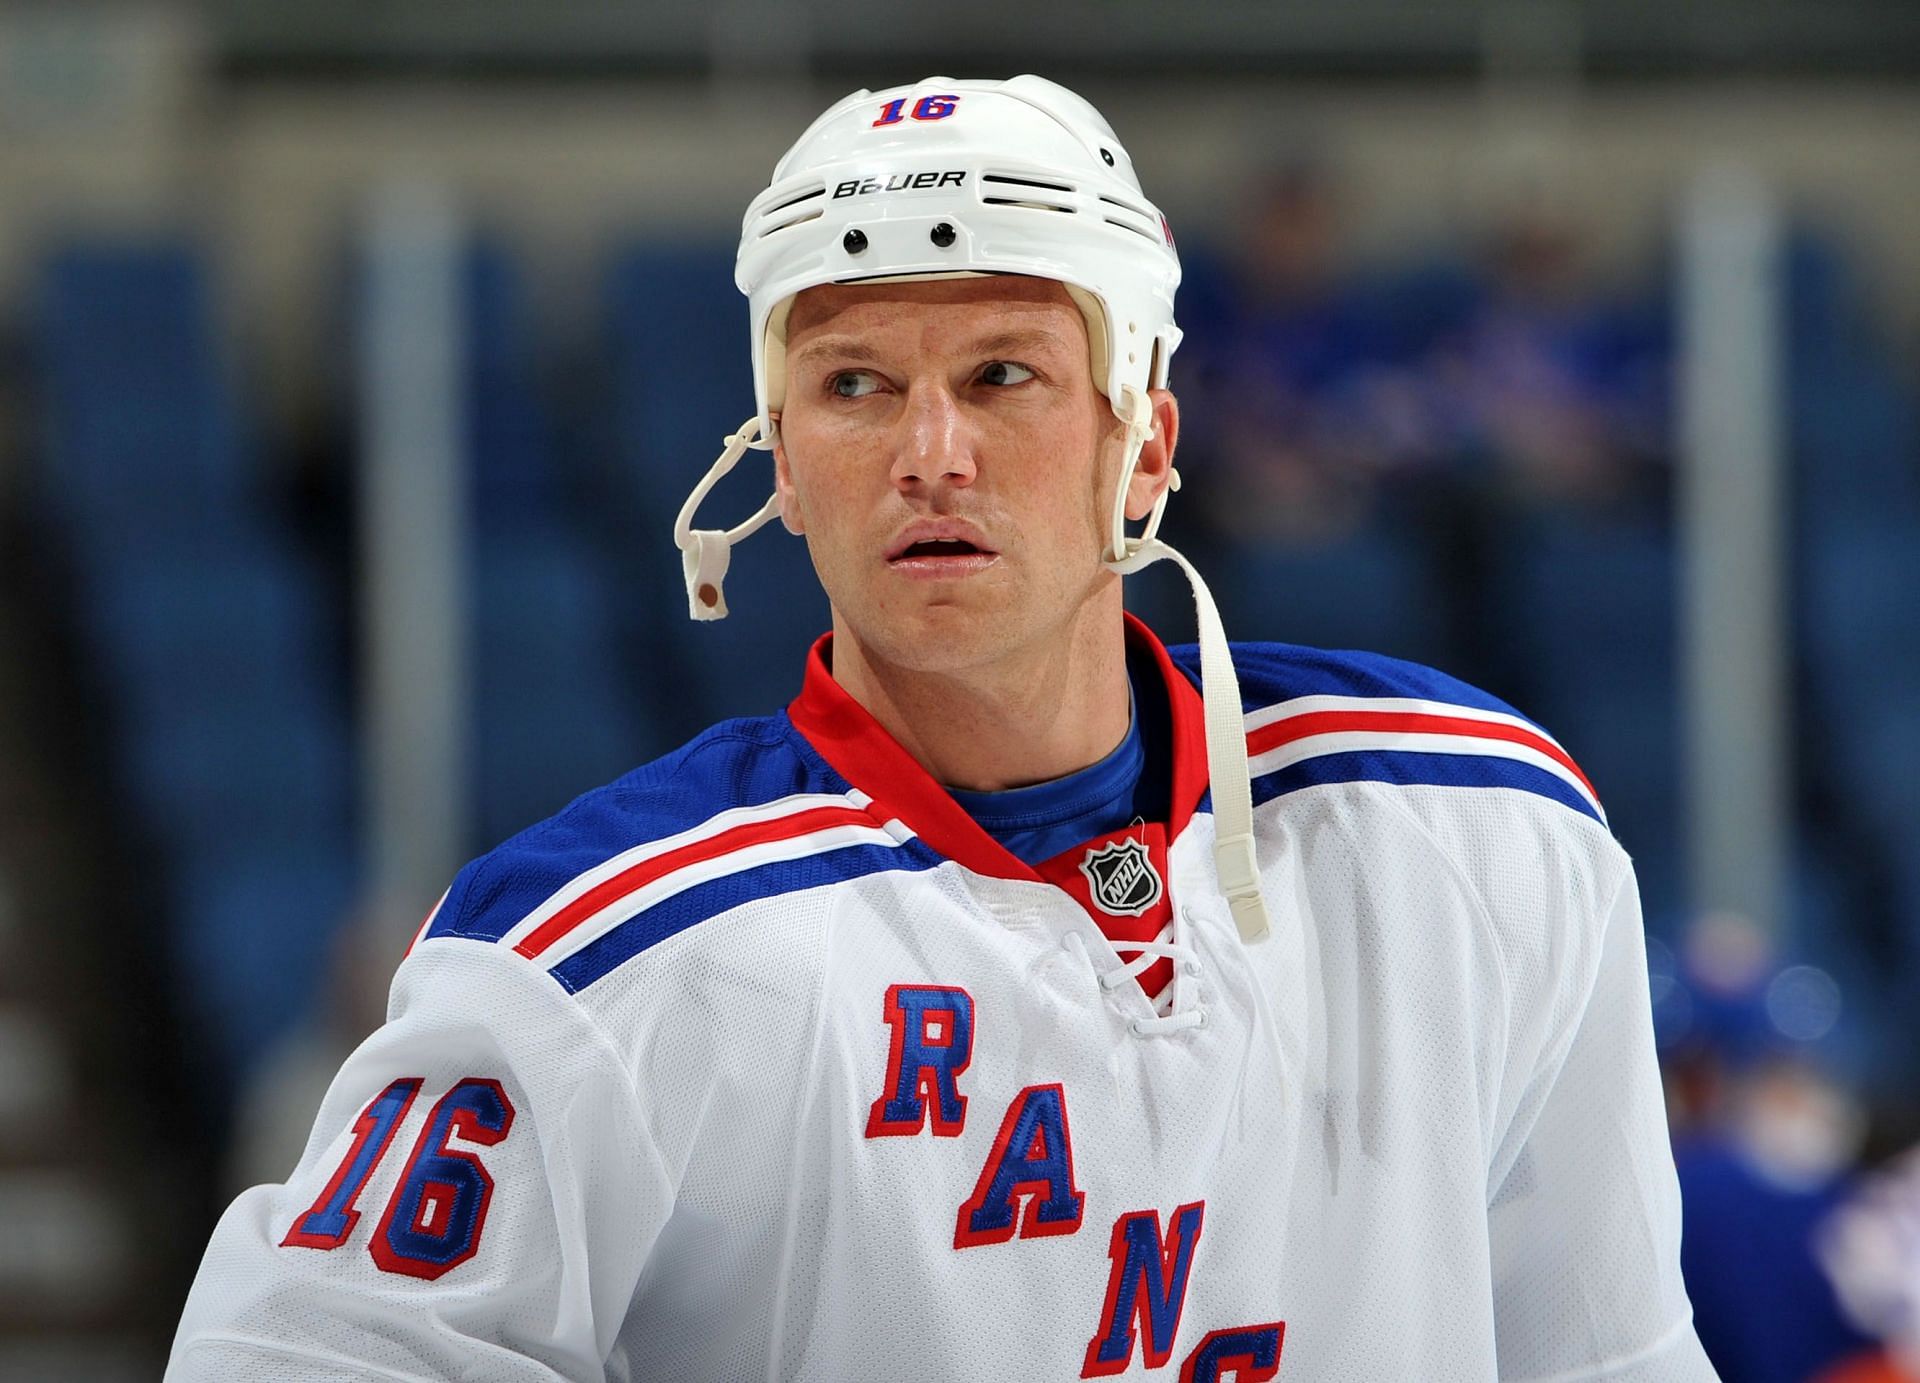 Did not realize Sean Avery was cast in Christopher Nolan's new